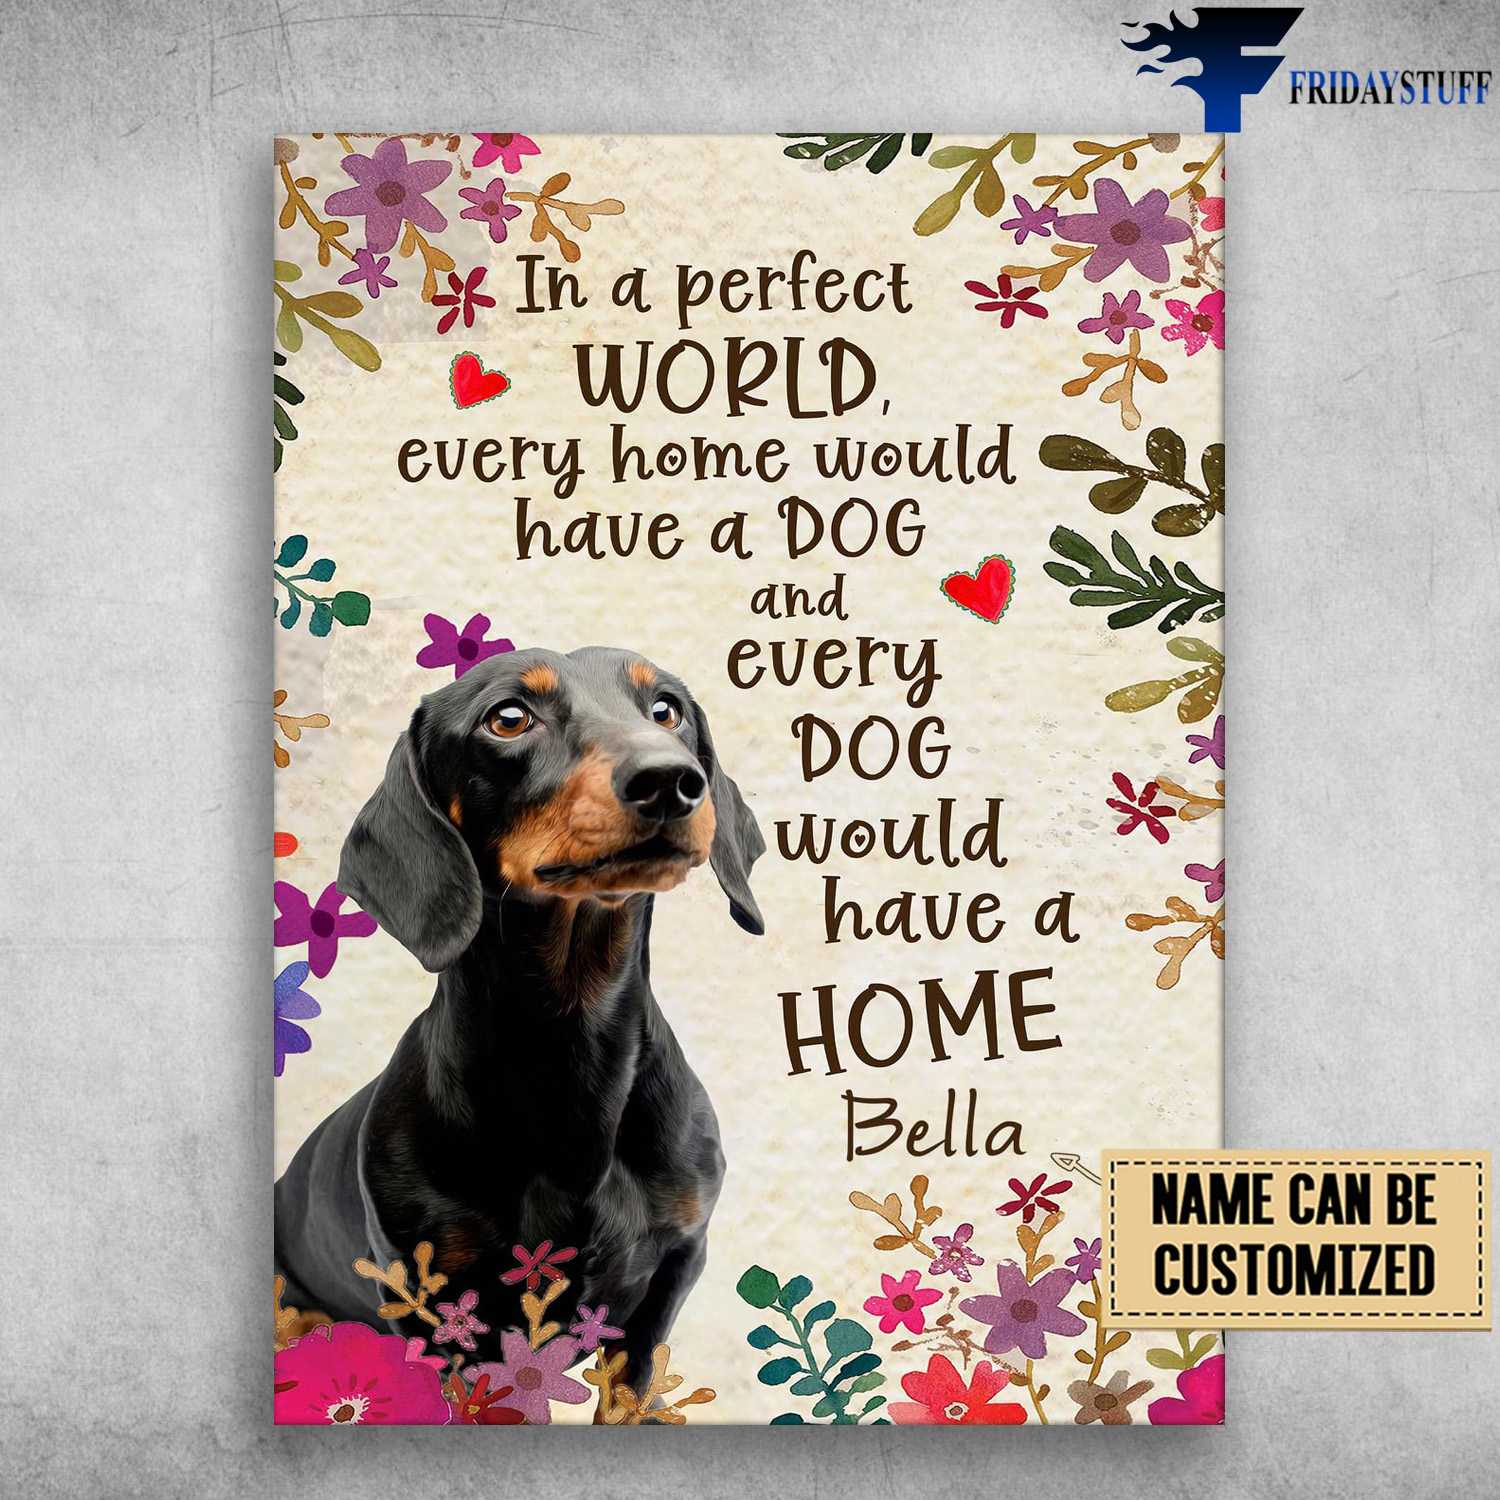 Dachshund Poster, Dog Lover, In A Perfect World, Every Home Would, Every Home Would Have A Dog, And Every Dog Would Have A Home